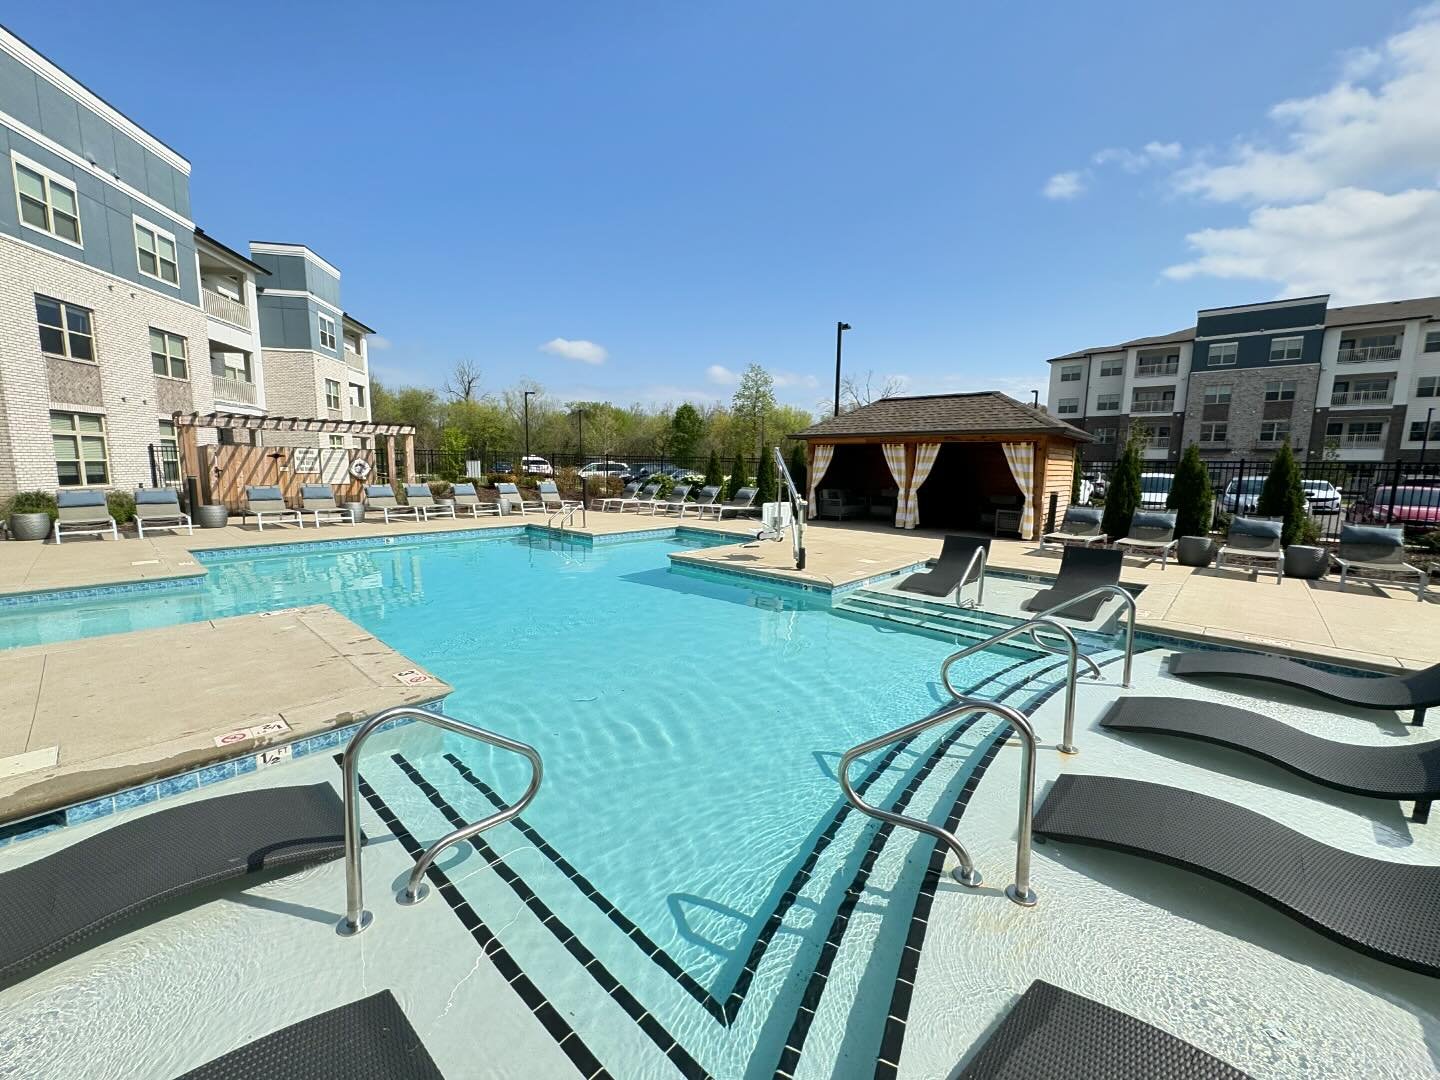 Who wouldn&rsquo;t want to be at our pool ALL SUMMER LONG, to relaxing in our Private Cabanas, or cooking dinner at our Pool-Side Gas Grilling Station, while you catch a tan on our Sun Ledges. This is exactly where you need to be this summer!☀️😁🌸⛱️